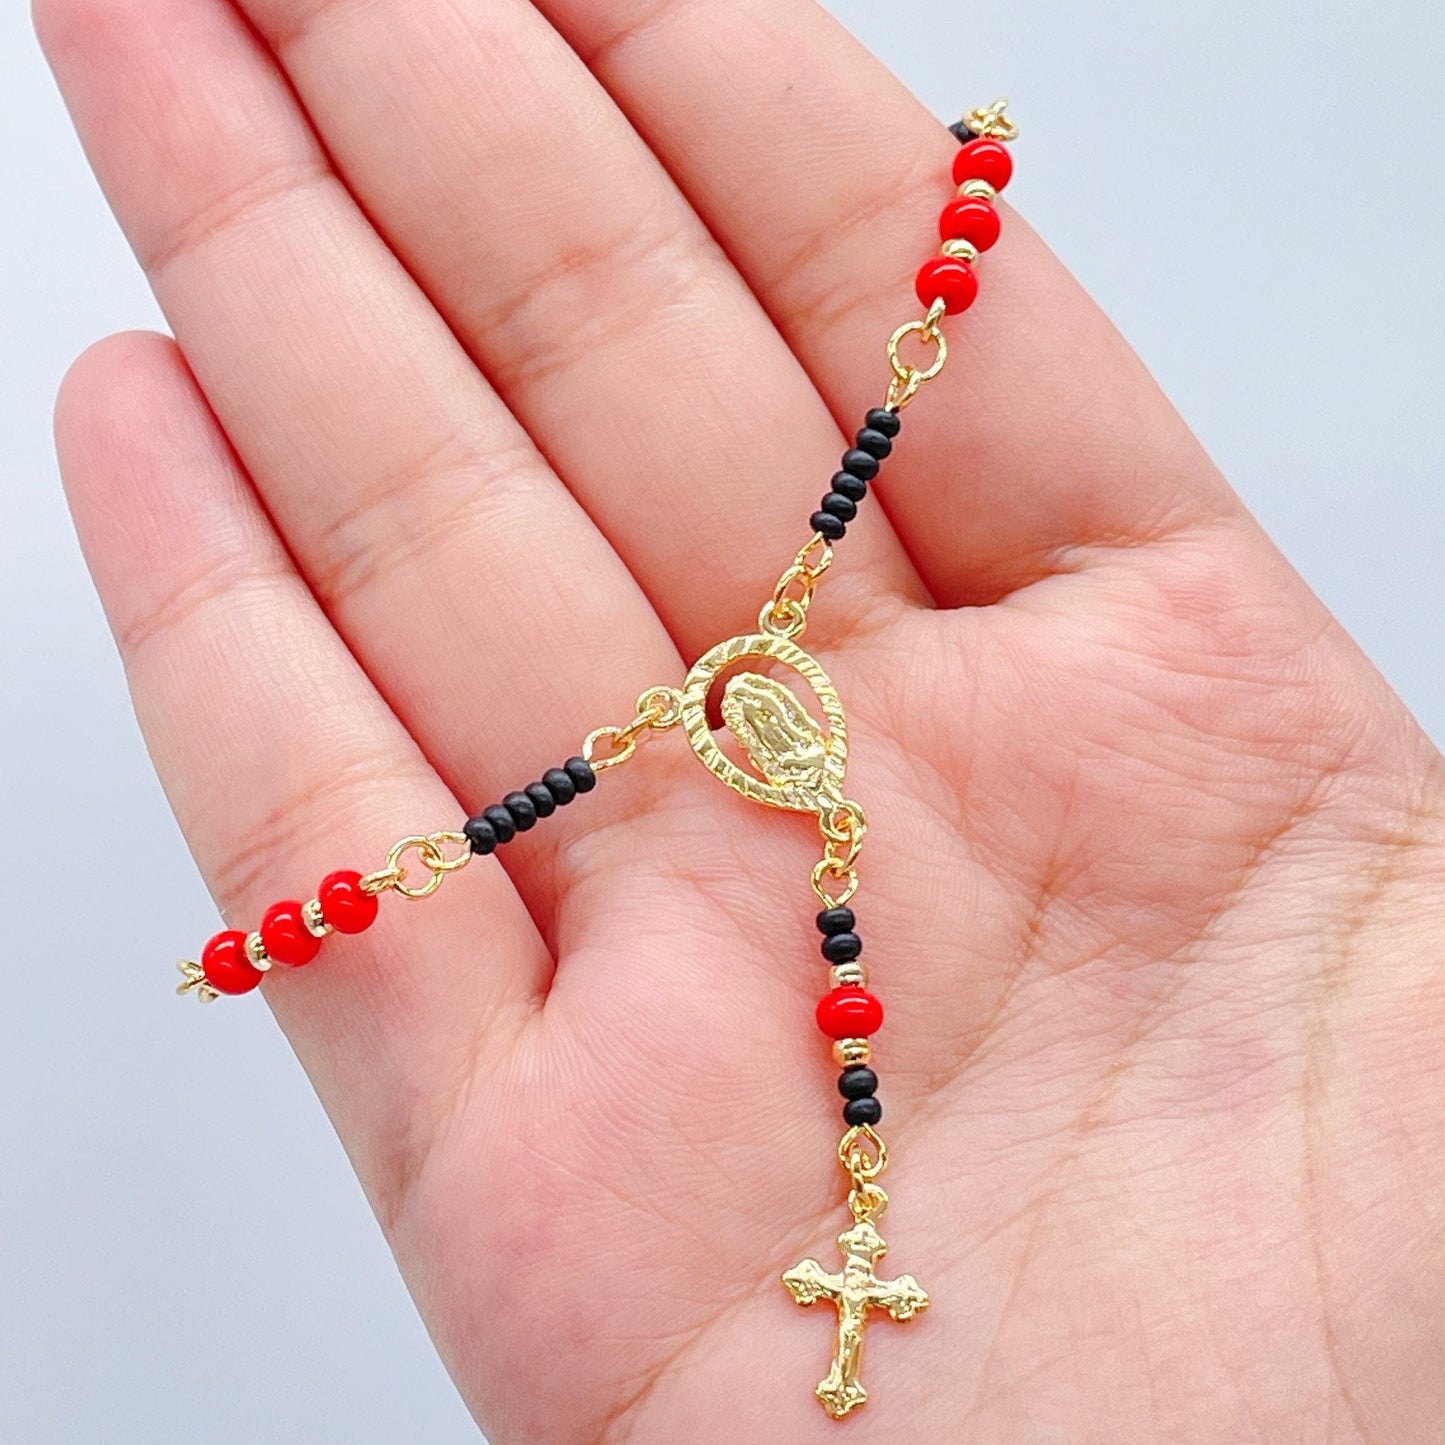 18k Gold Layered Protection Beaded Rosary Bracelet Featuring Our Lady of